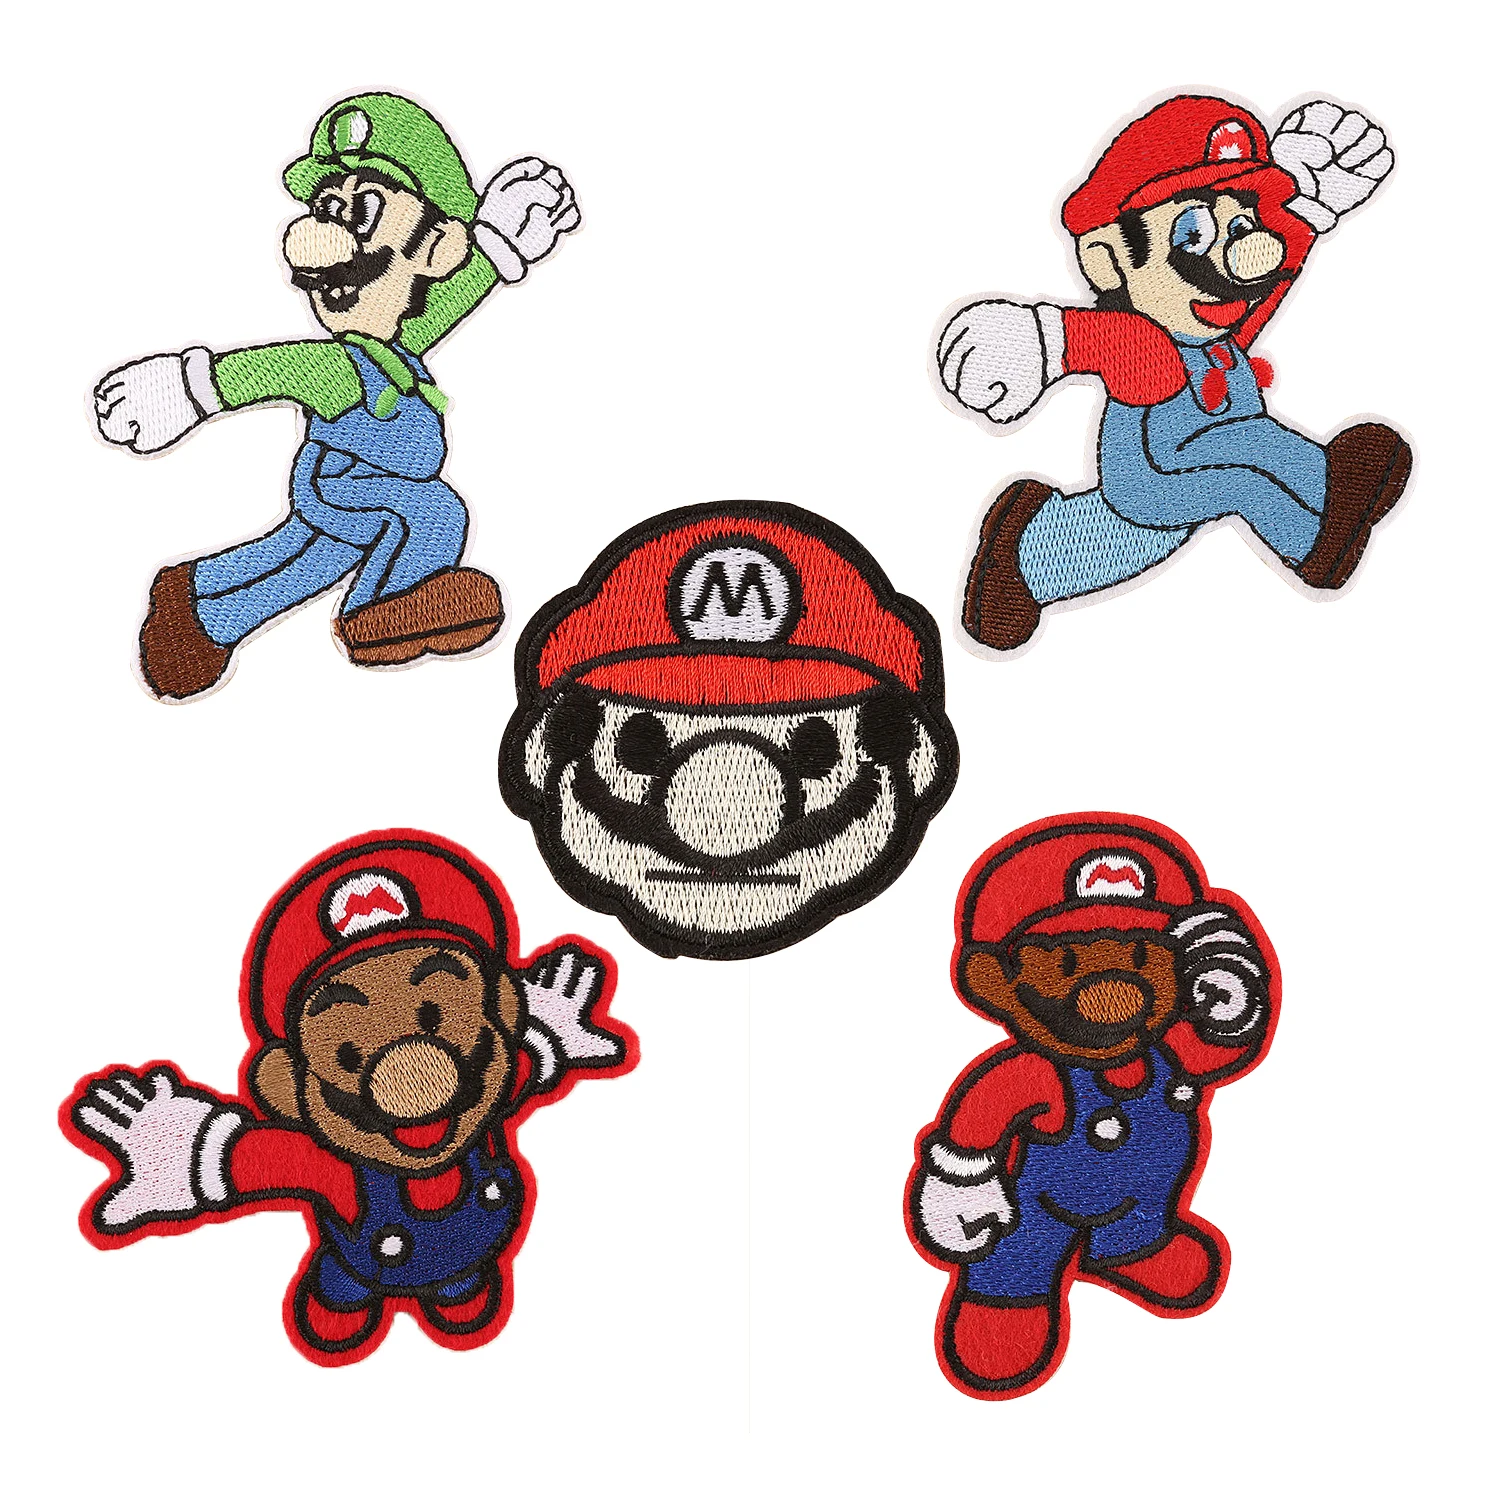 Iron On Embroidery Game Cartoon Theme Mario Character Motifs Patches - Buy  Iron On Embroidery Theme Motifs Patches,Game Cartoon Theme Motifs Patches,Mario  Patches Product on 